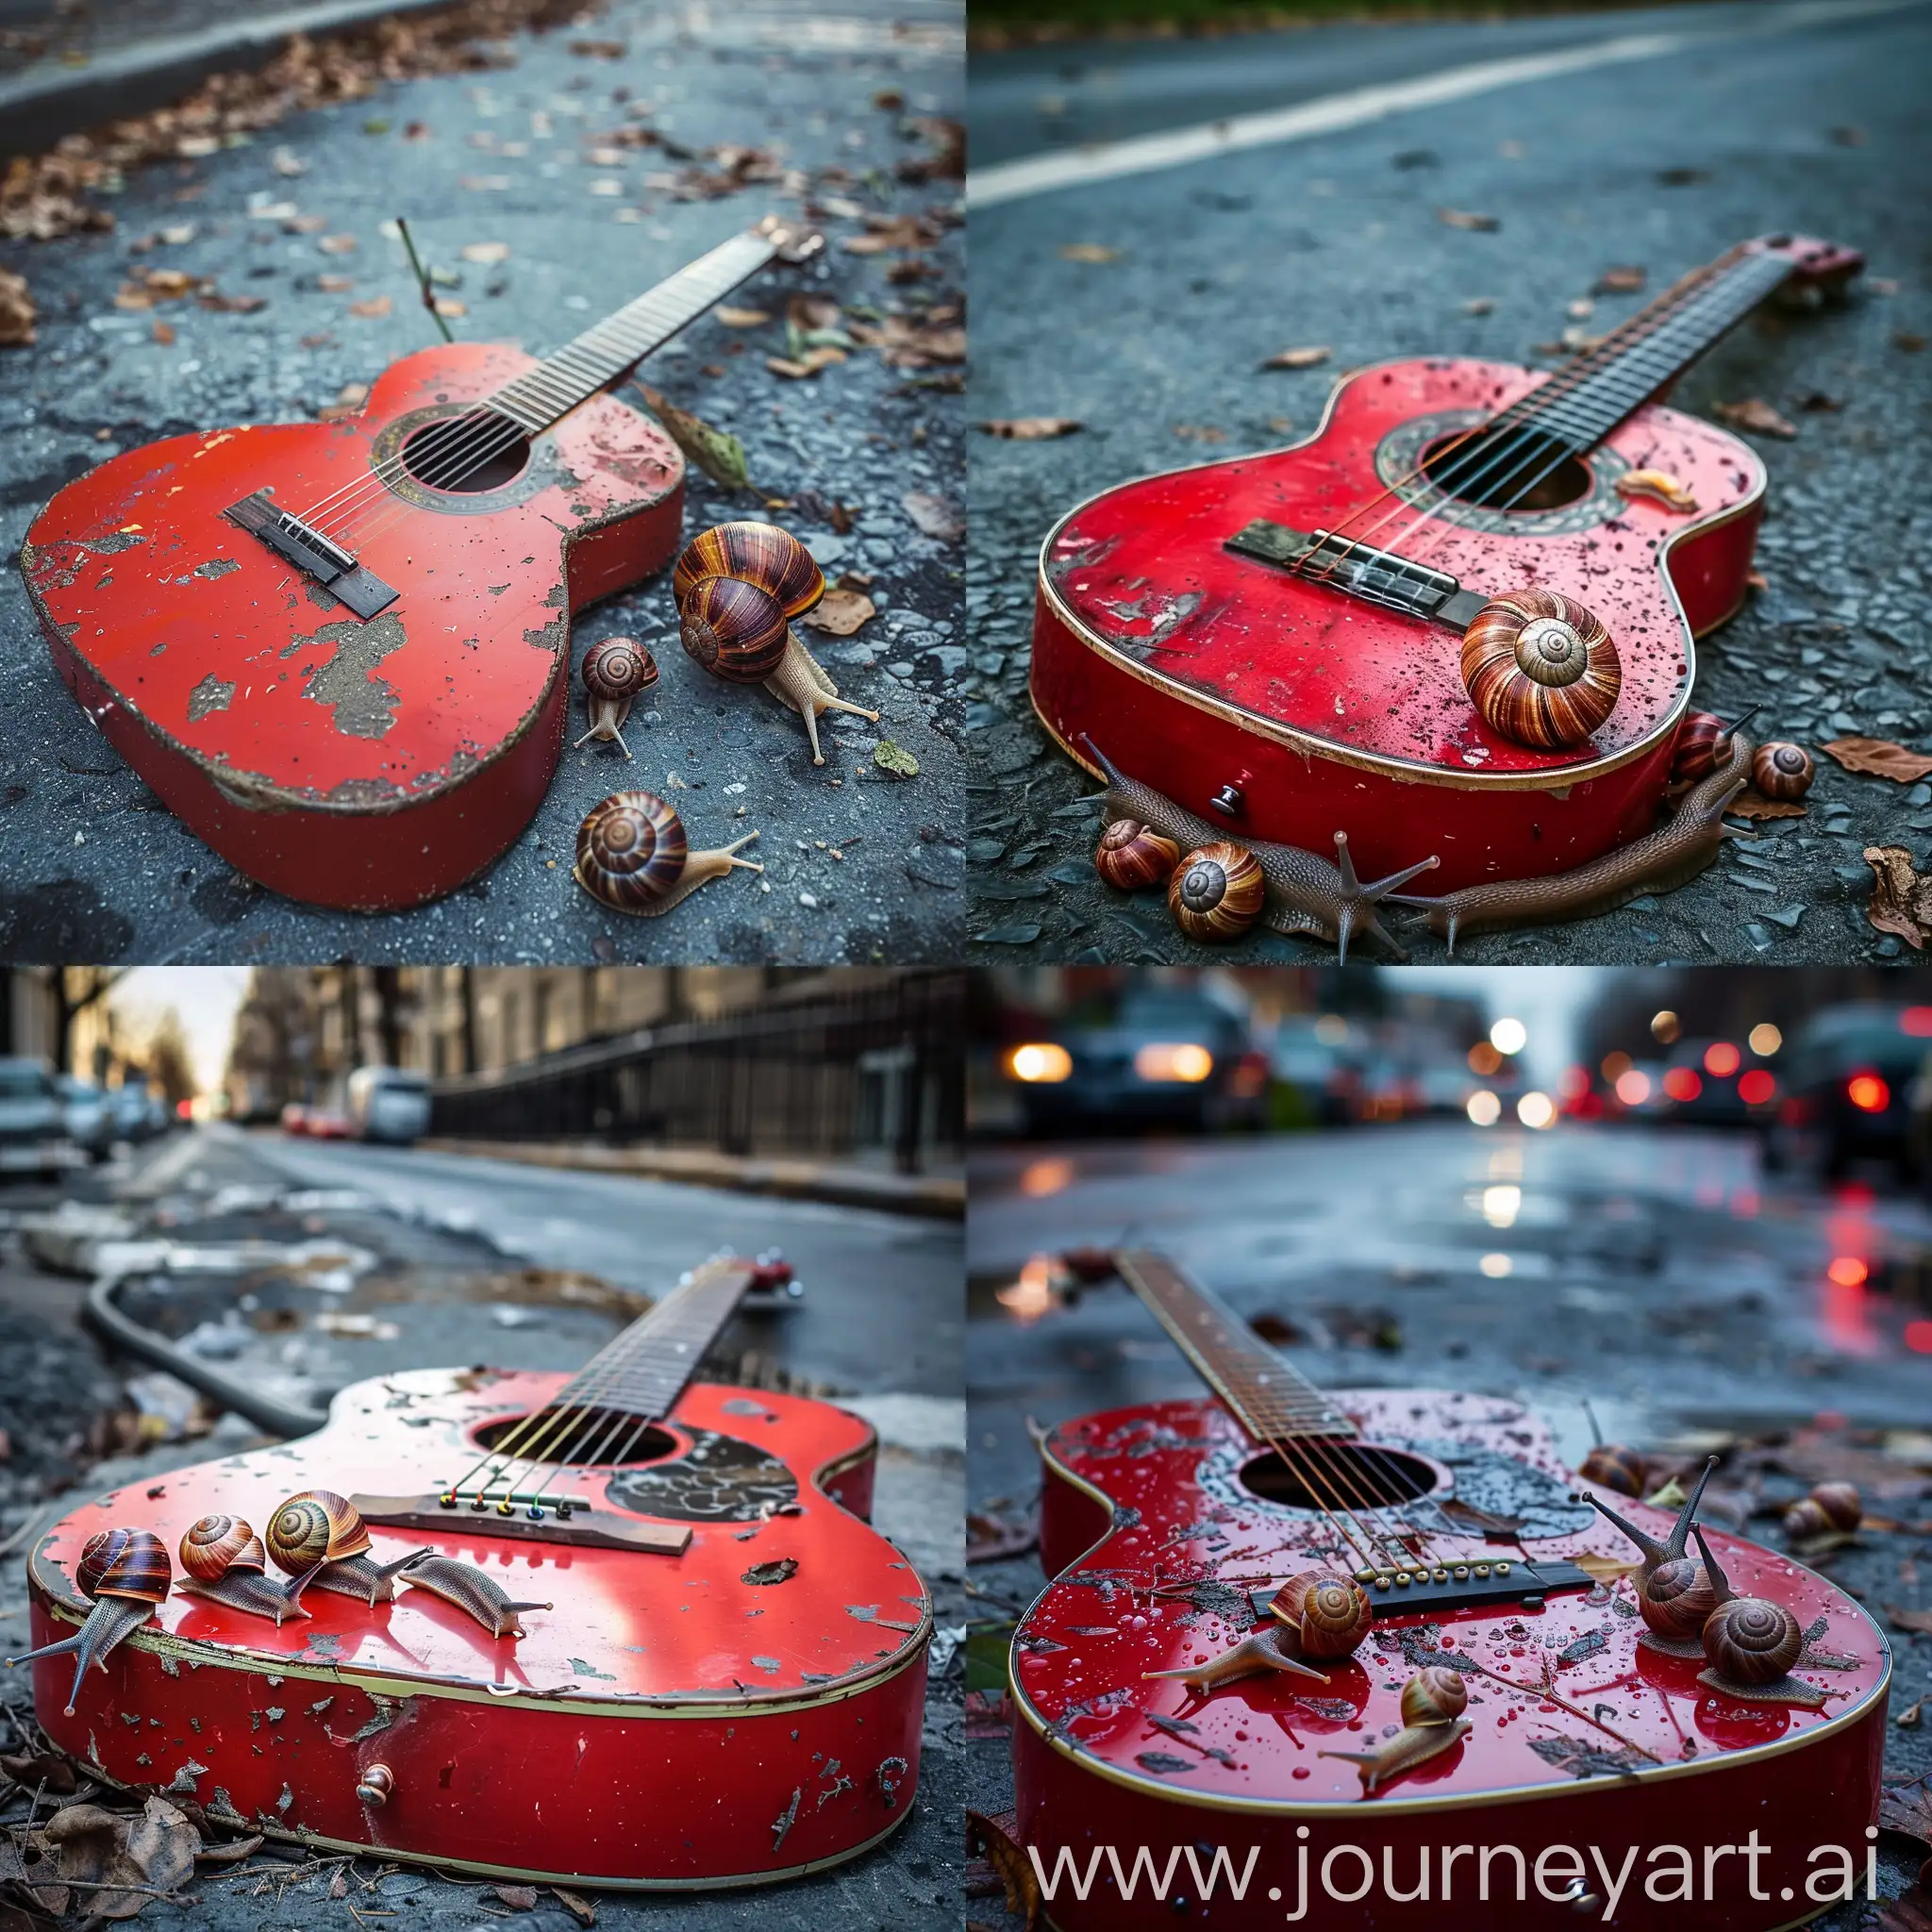 Urban-Street-Scene-with-Red-Guitar-and-Snails